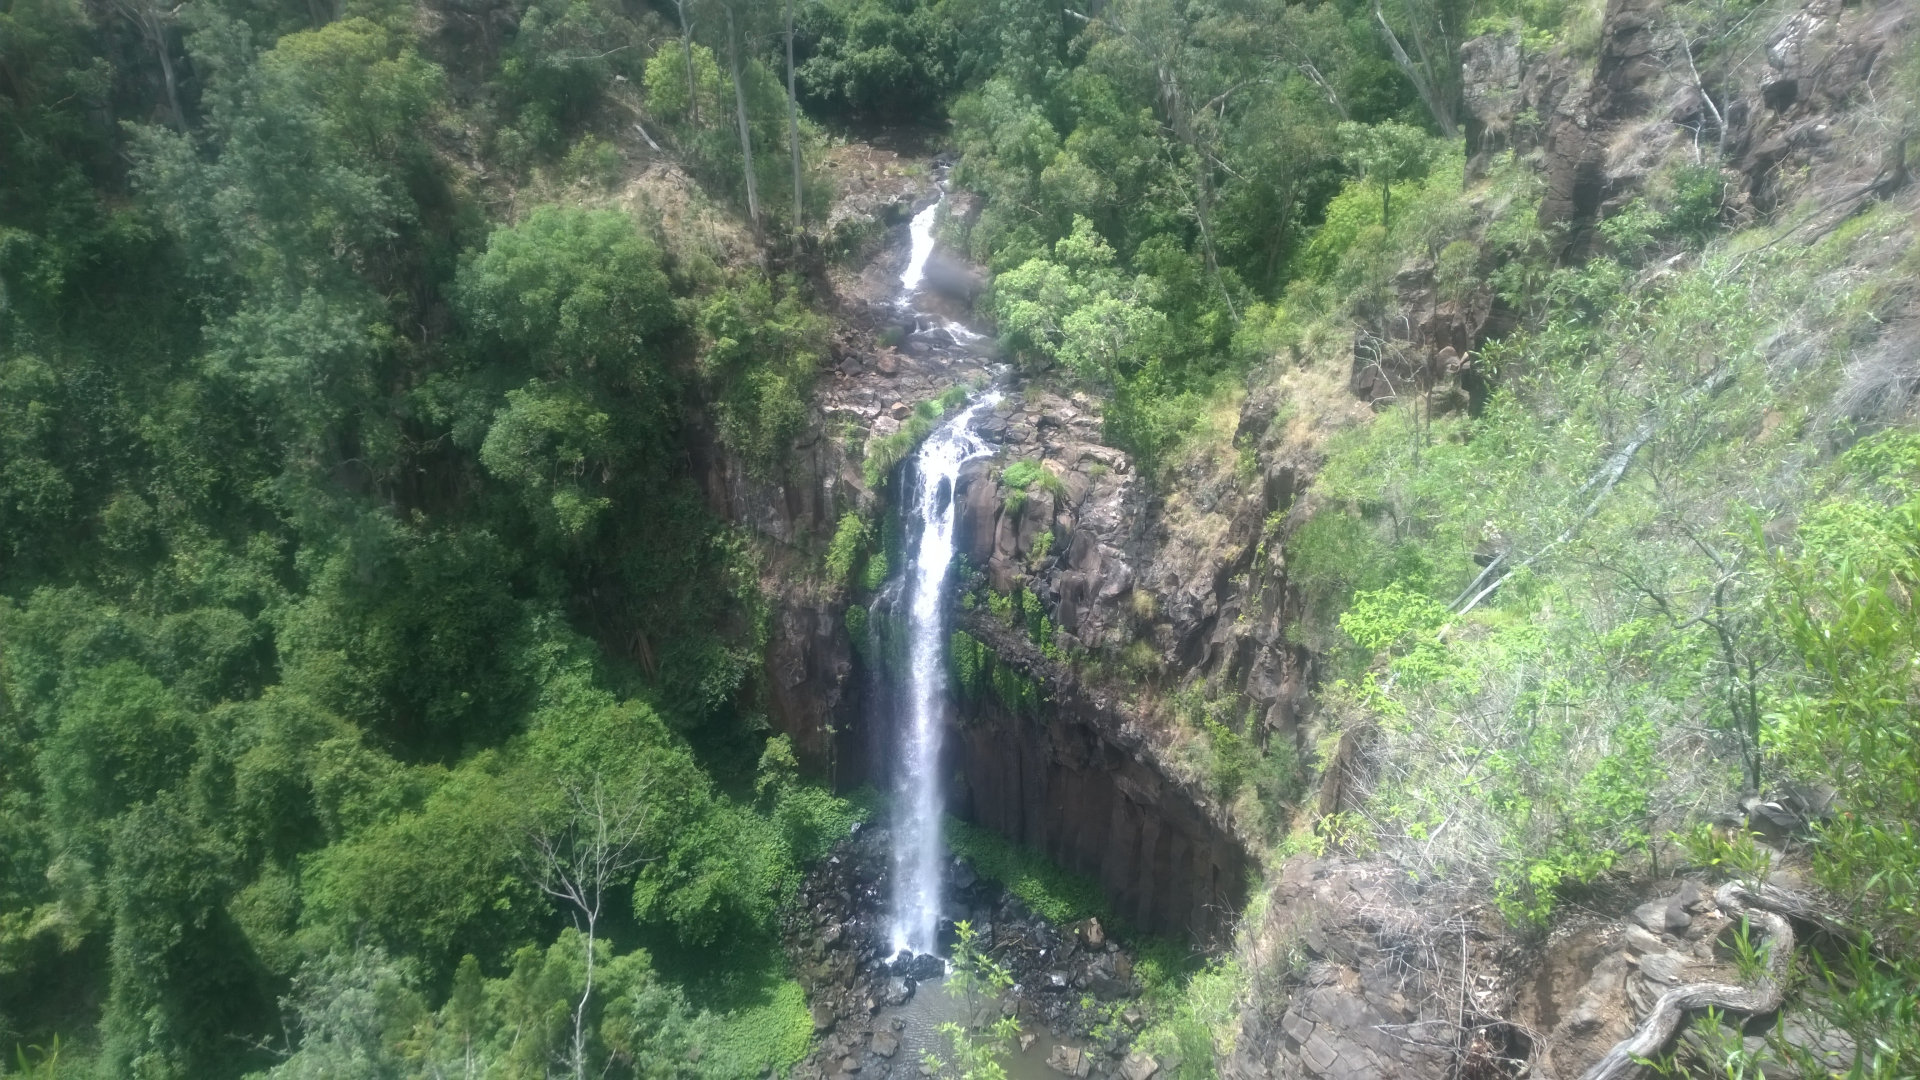 View from lookout platform above Daggs Falls, a plunge waterfall on Spring Creek, the cascading water over the rocks leading to the drop of the falls